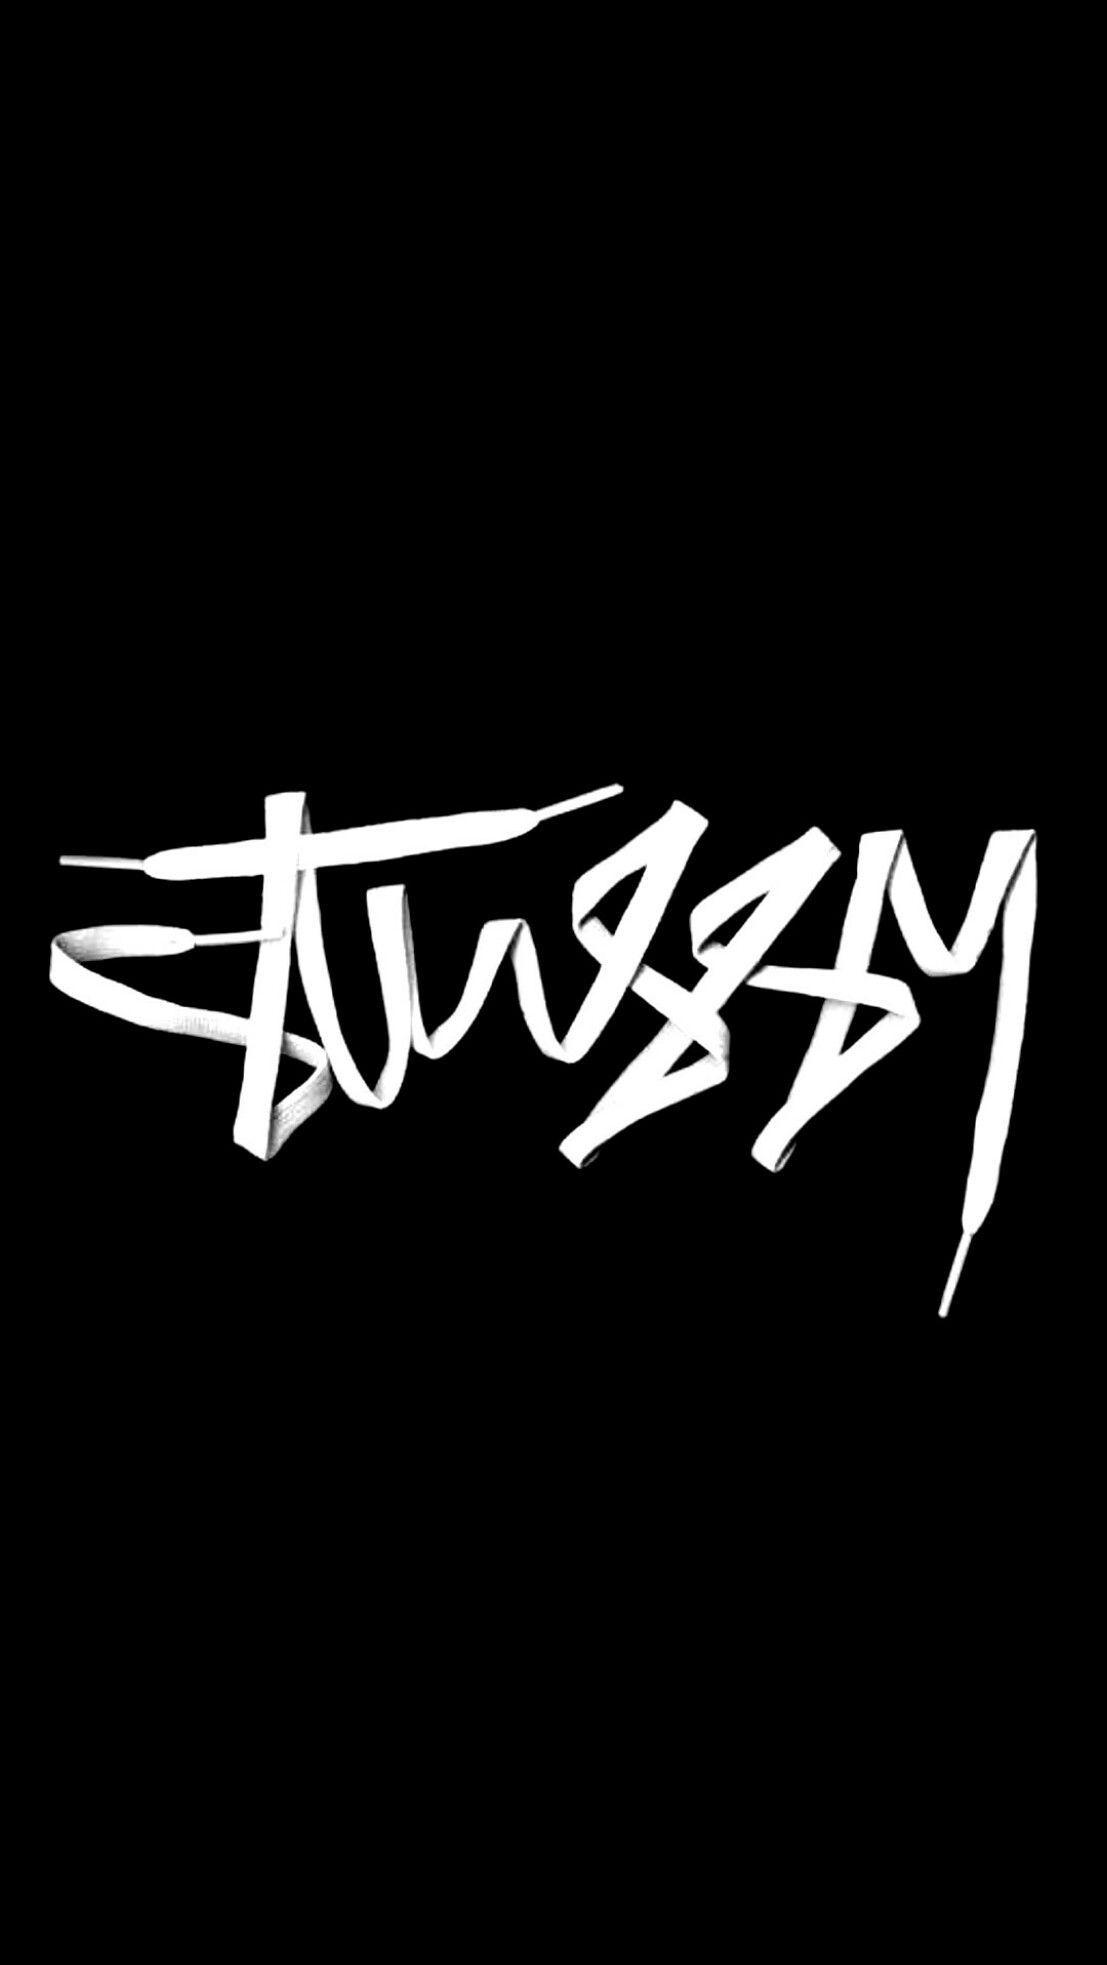 Stussy. Stussy and Wallpaper